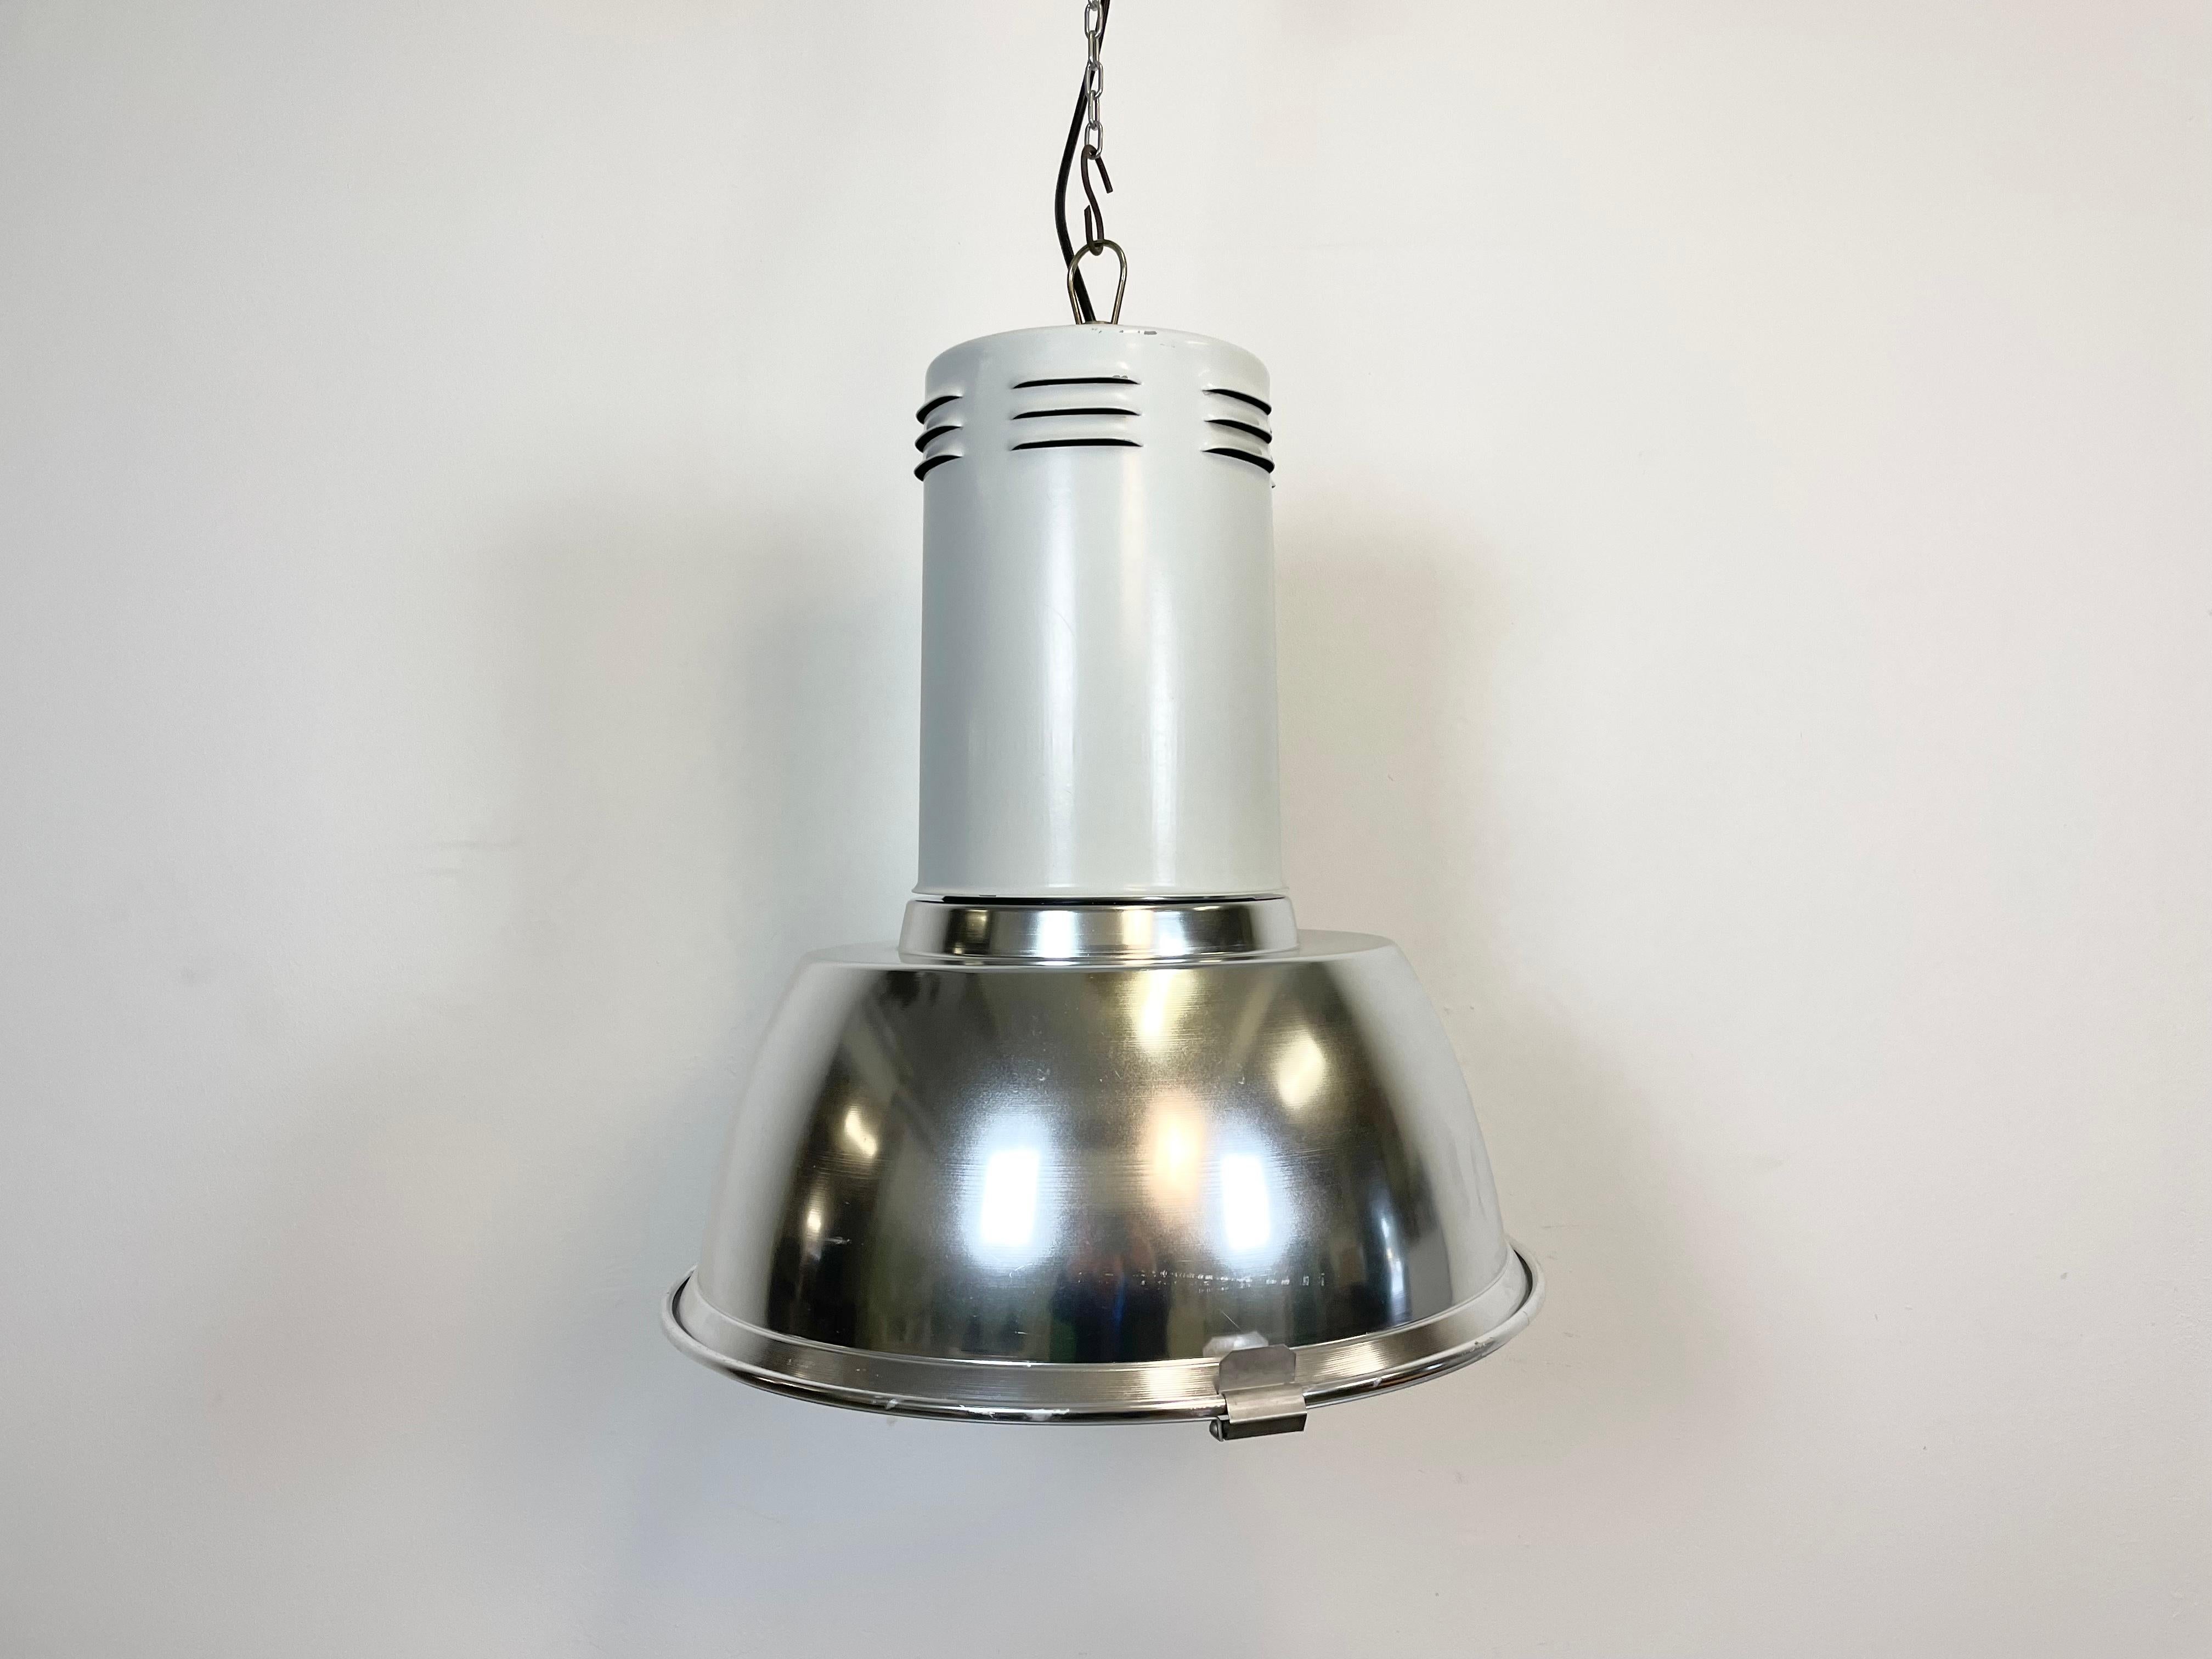 Industrial hall lamp made by Siemens in Germany during the 1980s. It features aluminium shade, iron top and iron grid. The socket requires E 27 light bulb. New wire. The diameter of the shade is 49 cm.The weight of the lamp is 5 kg.